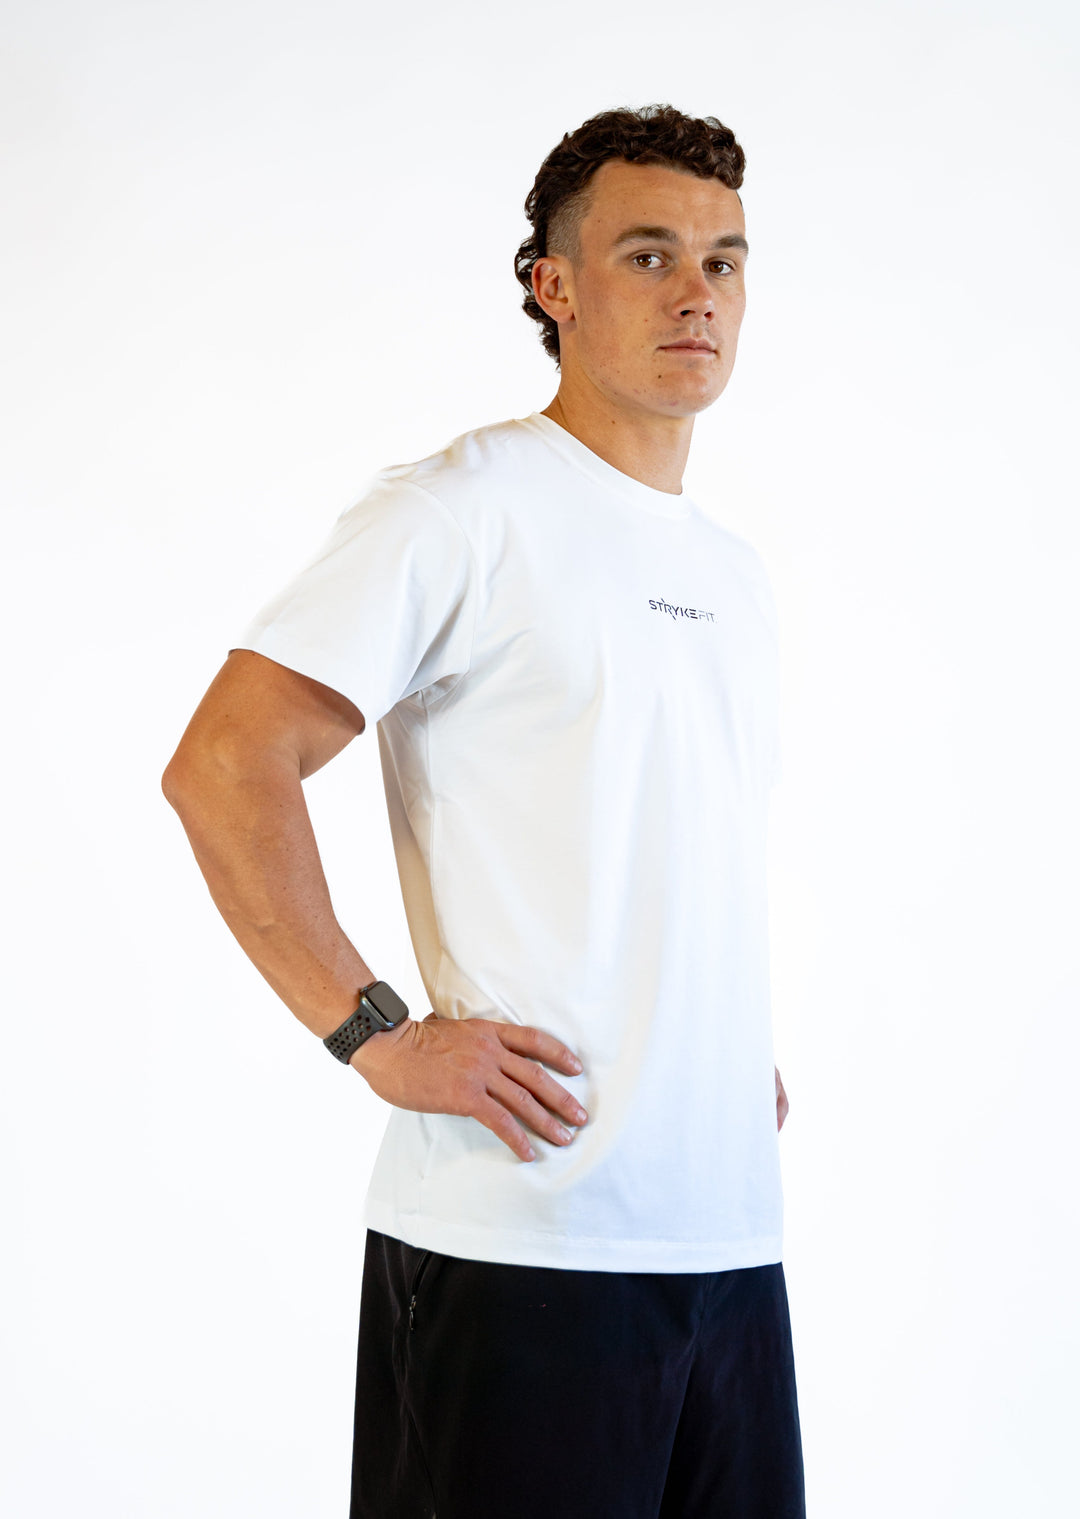 Our SF Team Tee is all about comfort. Whether you're hitting the pavement or pushing through that extra mile, our tee is designed for you. Engineered with maximum comfort, ensuring you stay focused and motivated with every step.